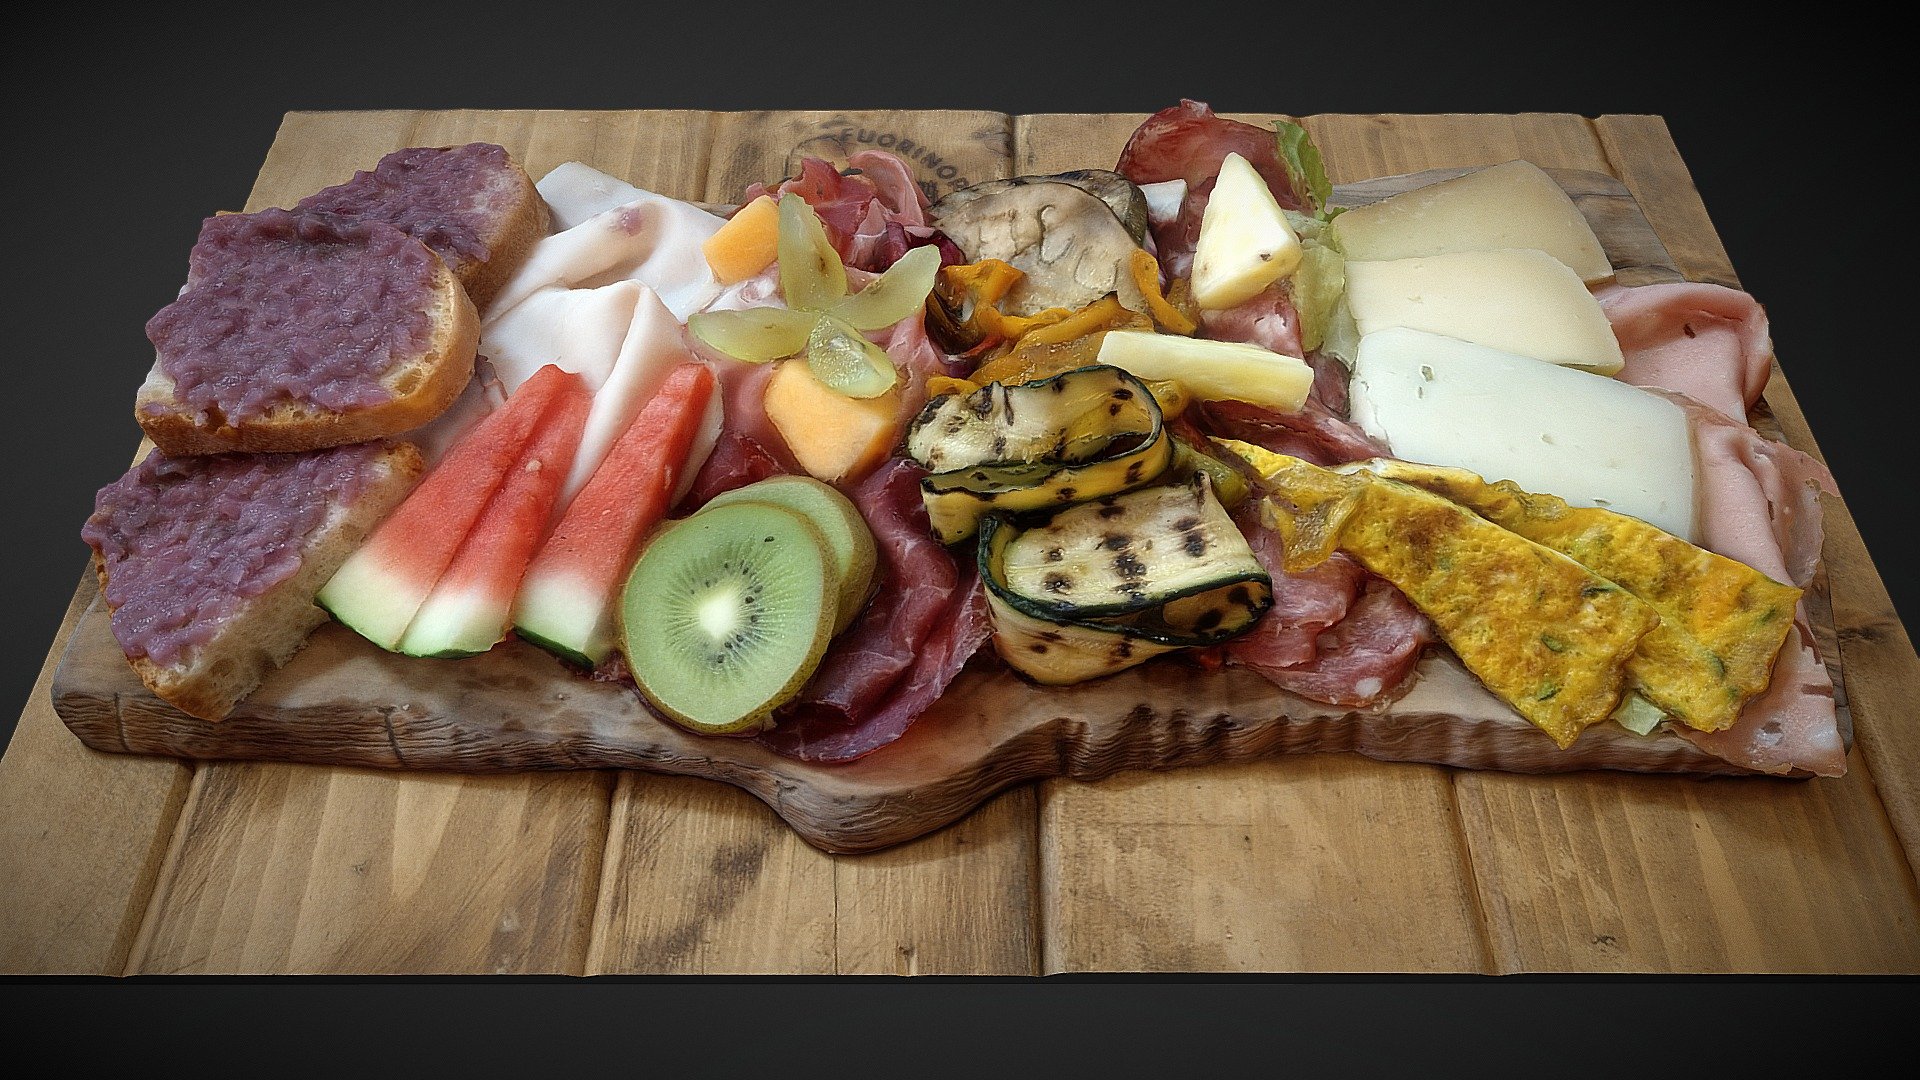 Nice assorted plate of cold meat, cheese and fruit at Fuorinorma in Rome. Totally worth the visit!

Location: Via De Serpenti 178, 00184 Rome (Italy).

Pictures taken with an HTC U11+. Model edited in Blender 3d model